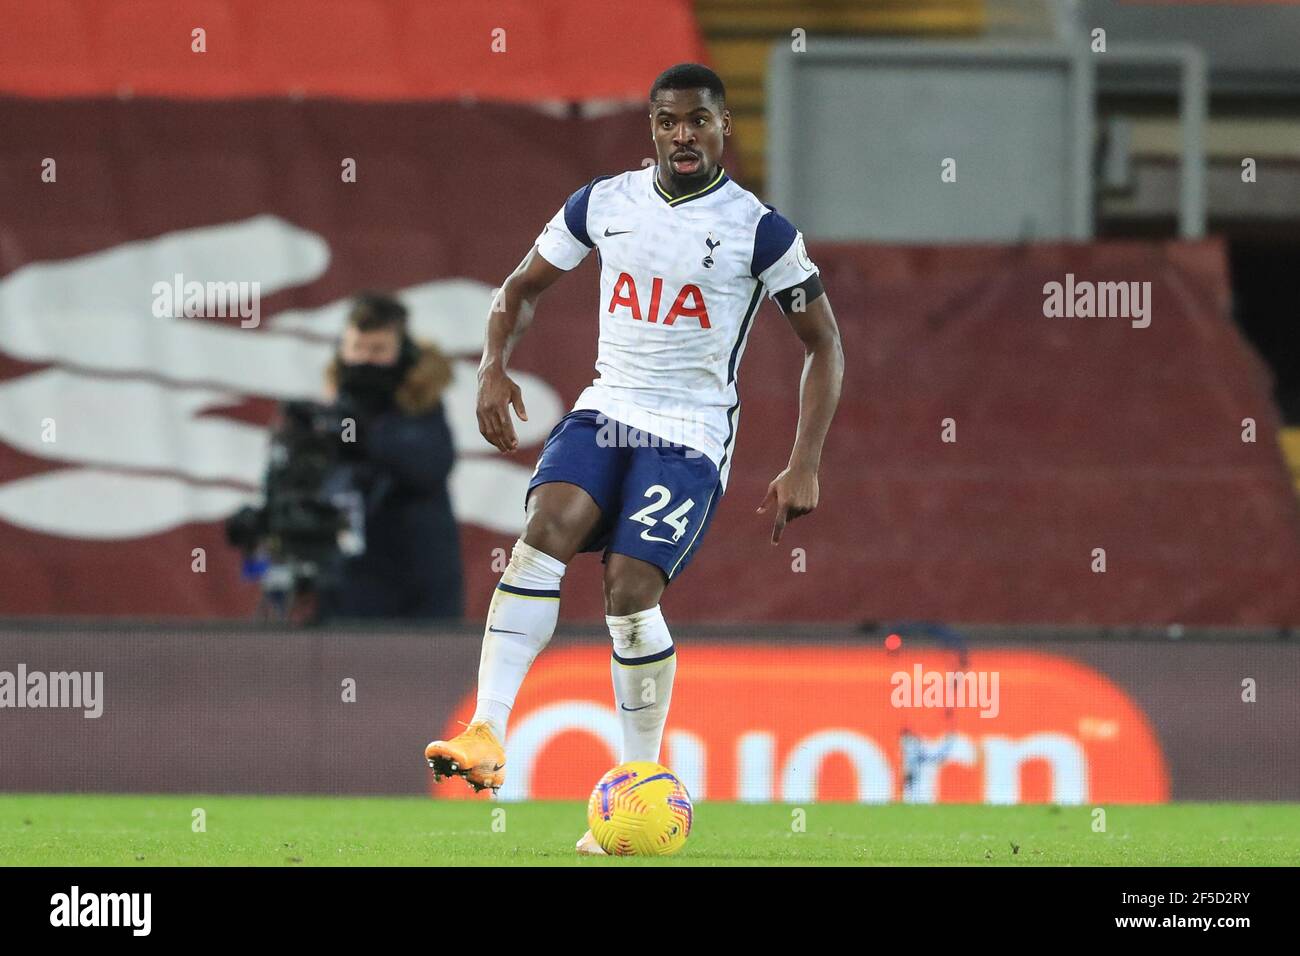 Serge Aurier #24 of Tottenham Hotspur during the game Stock Photo